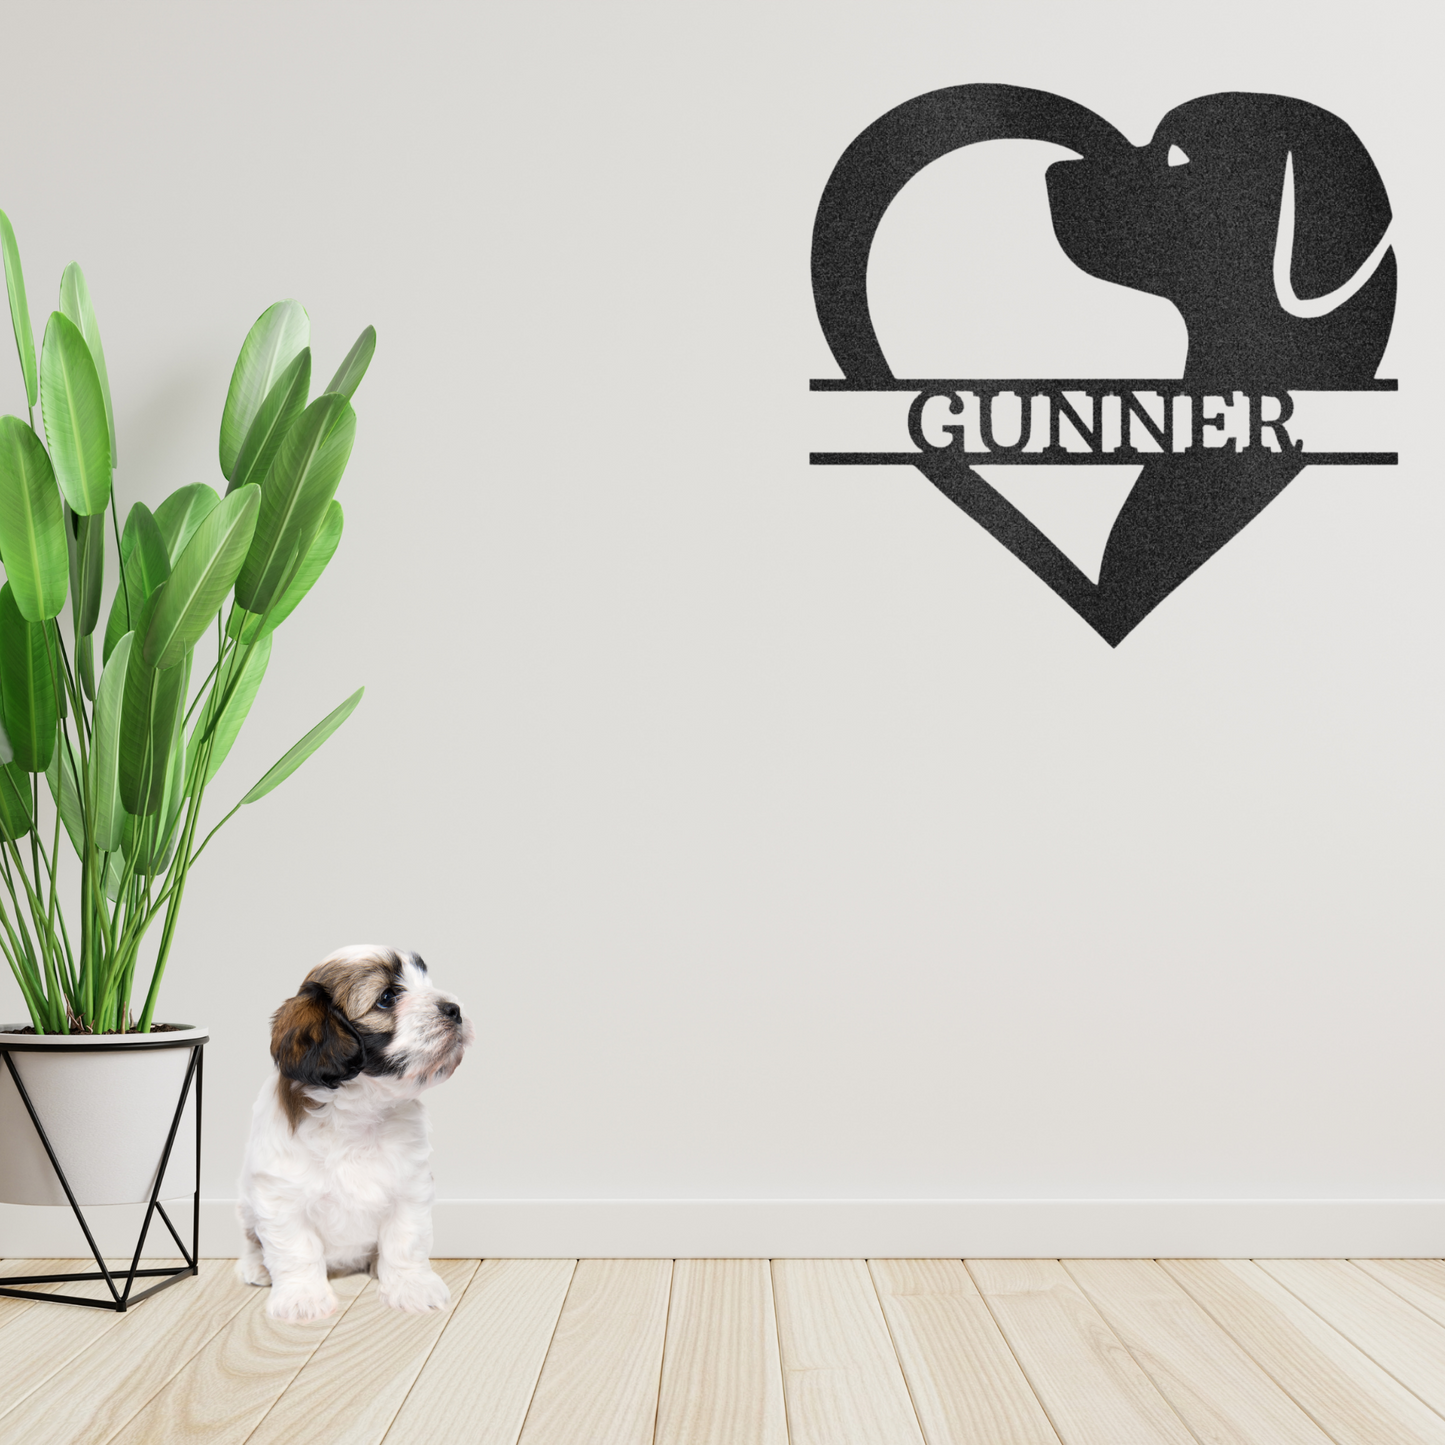 Personalized Dog Love Metal Wall Art dog lovers home decor wall steel art dog pet parents pet moms and dads self indulgence pet passion